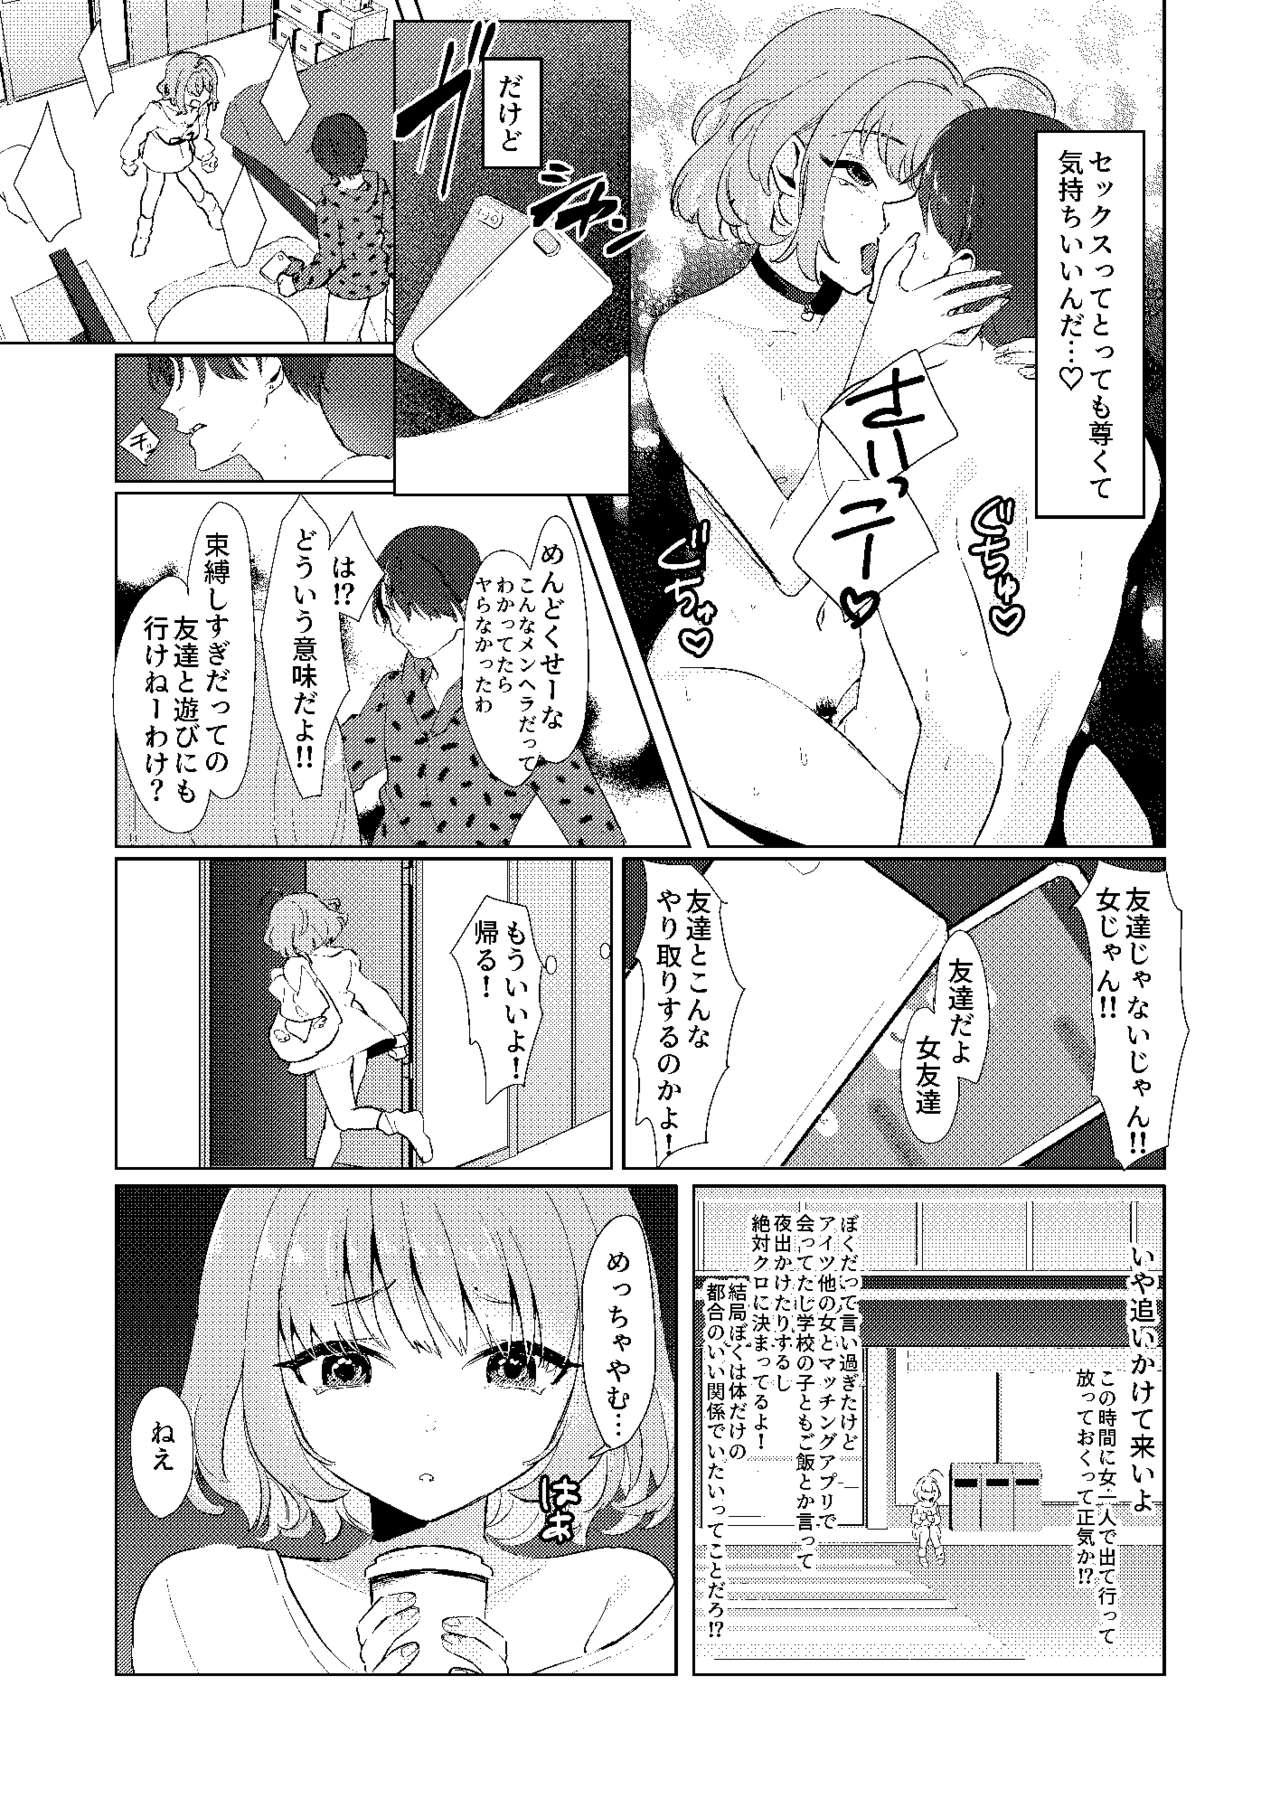 Office Sex 夢〇りあむの青春 - The idolmaster Sex Toy - Page 10